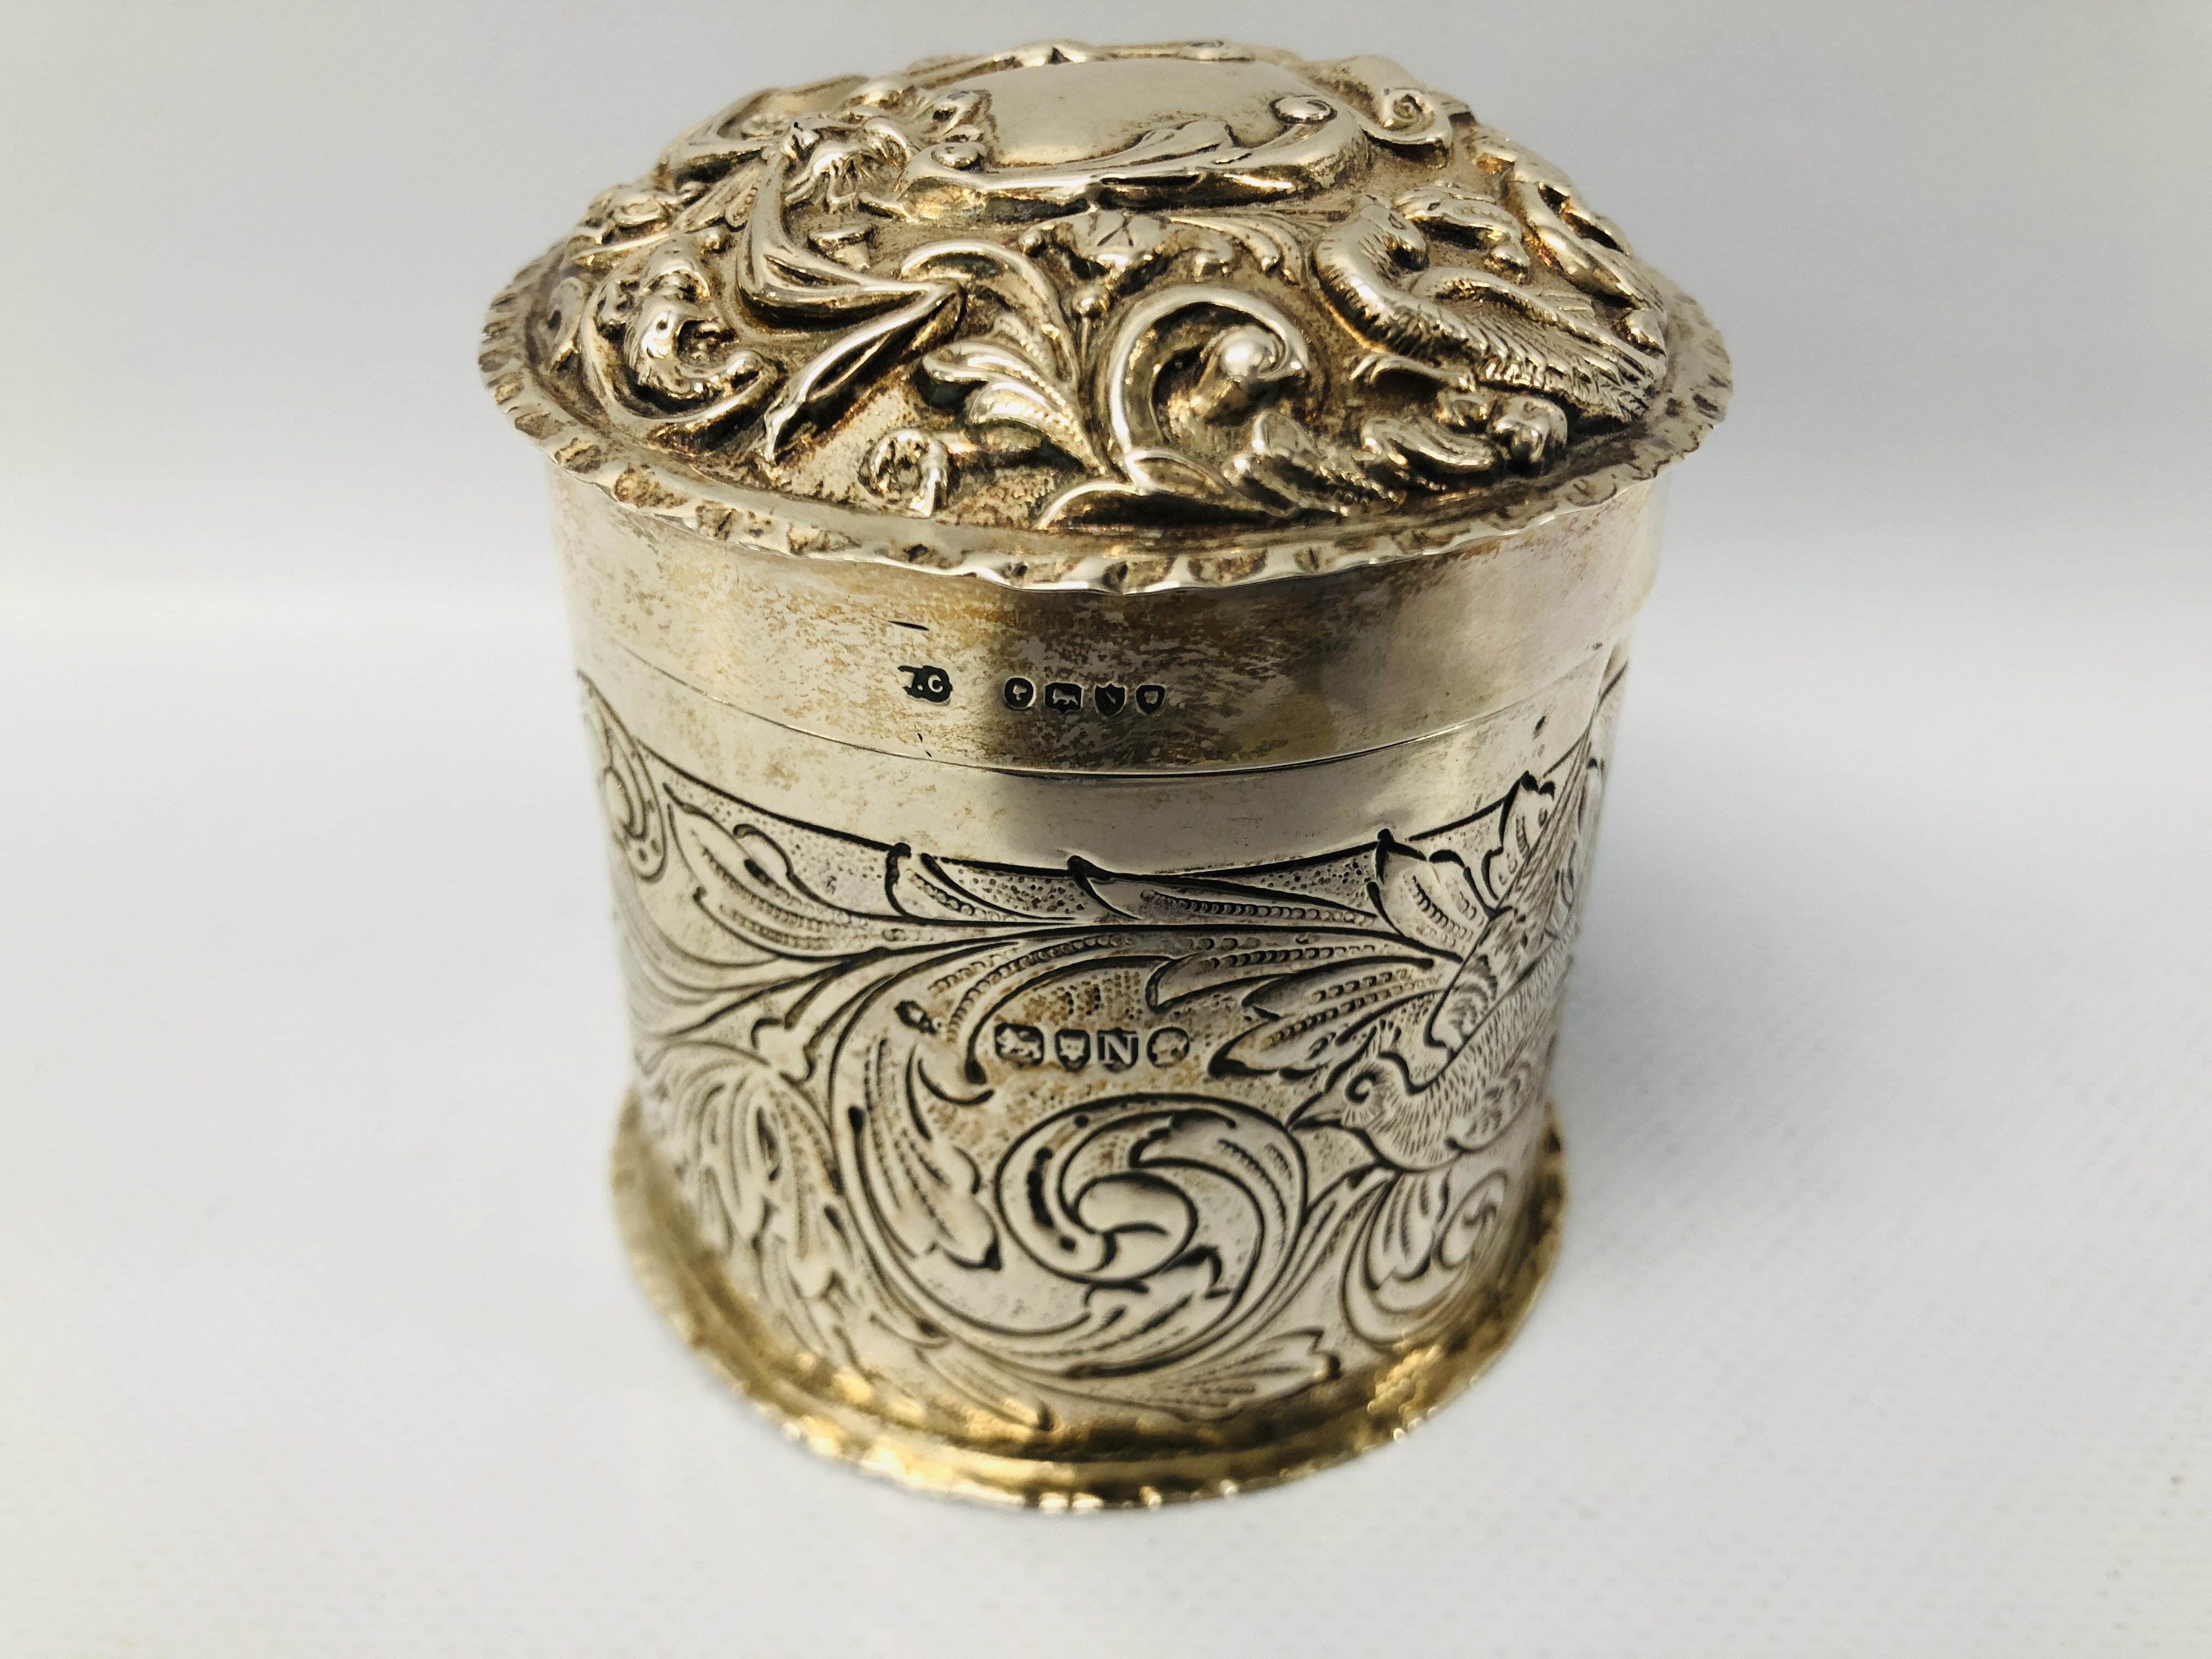 A VICTORIAN SILVER CYLINDRICAL BOX AND COVER DECORATED WITH BIRD LONDON 1888, WILLIAM COMINS - H 8. - Image 10 of 21